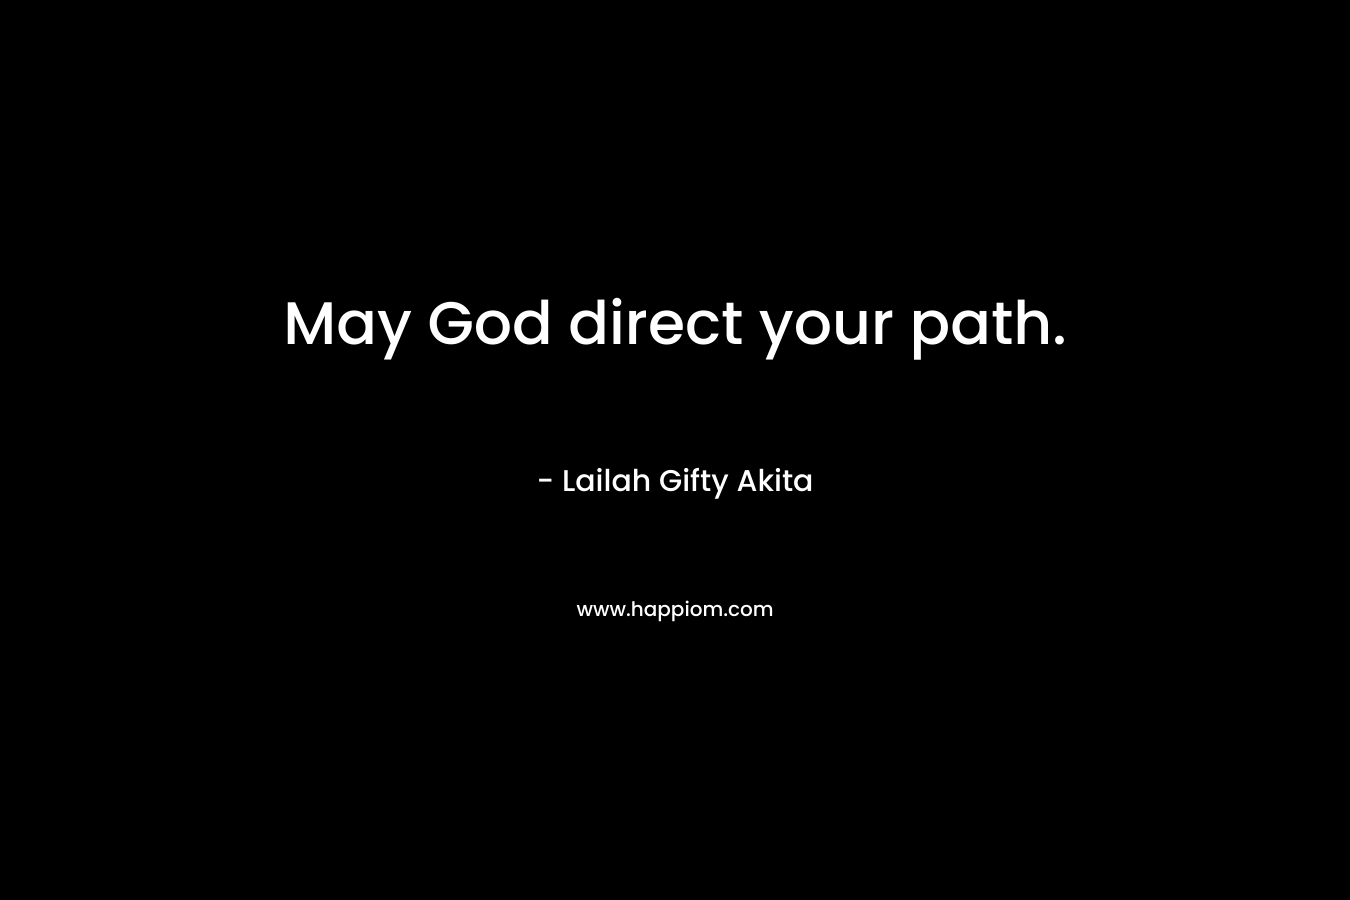 May God direct your path.